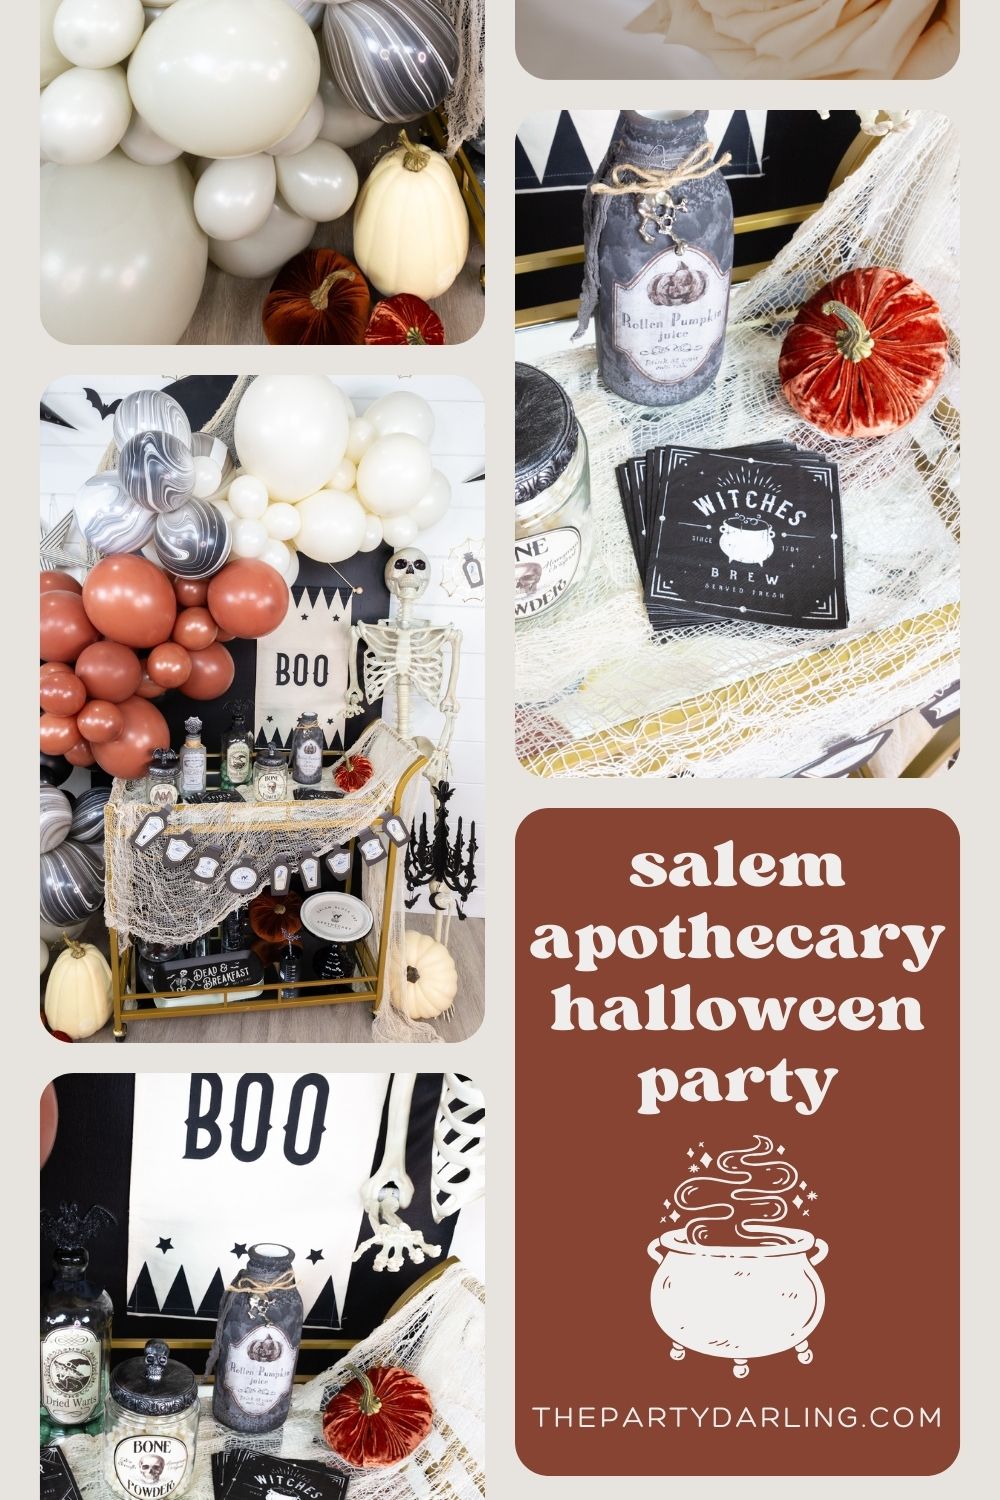 Salem Apothecary Halloween Party | The Party Darling